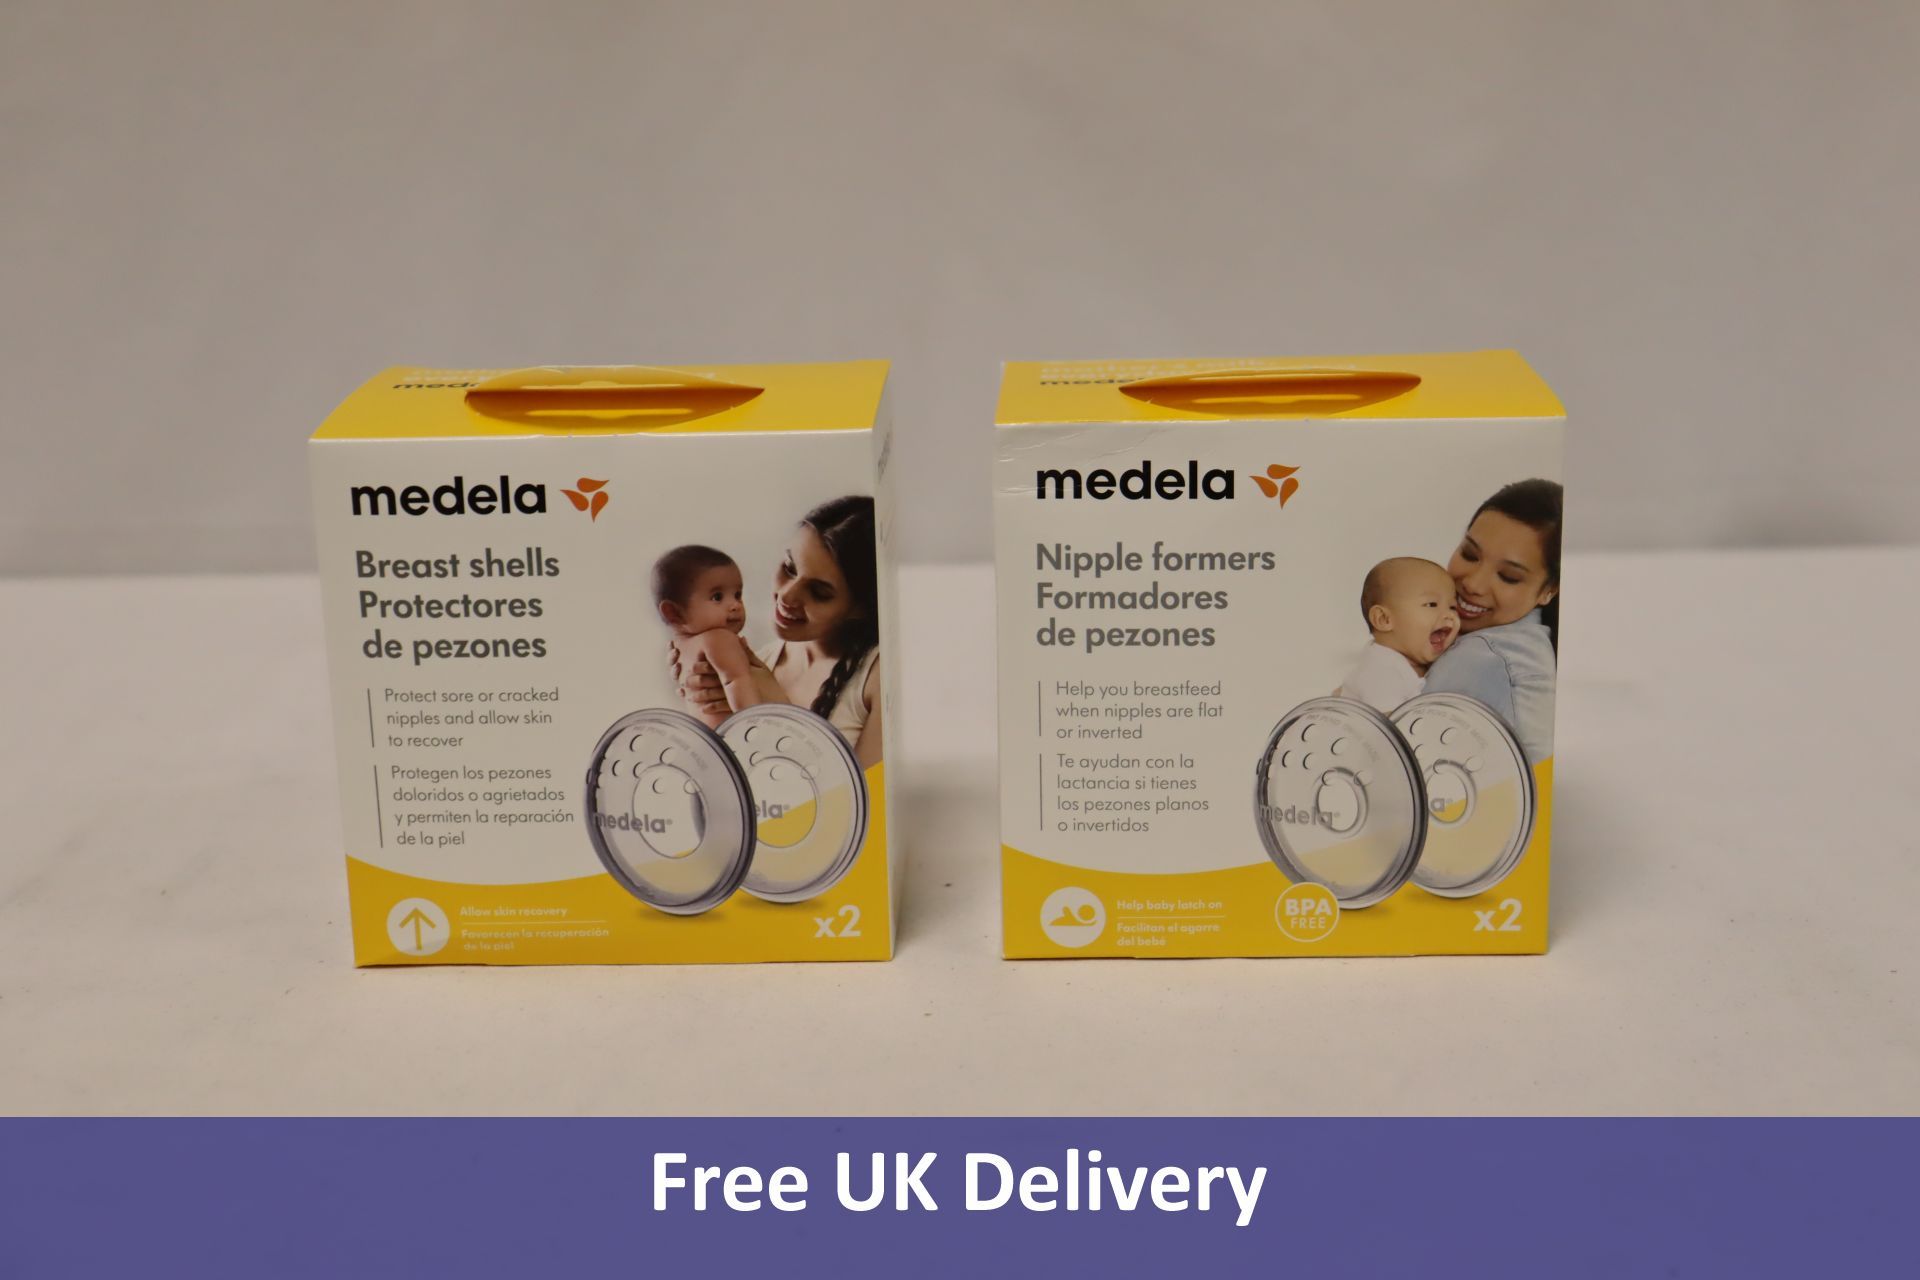 Two Medela items to include 5x Nipple Formers, 2 Piece Packs, 5x Breast Shells, 2 Piece Packs